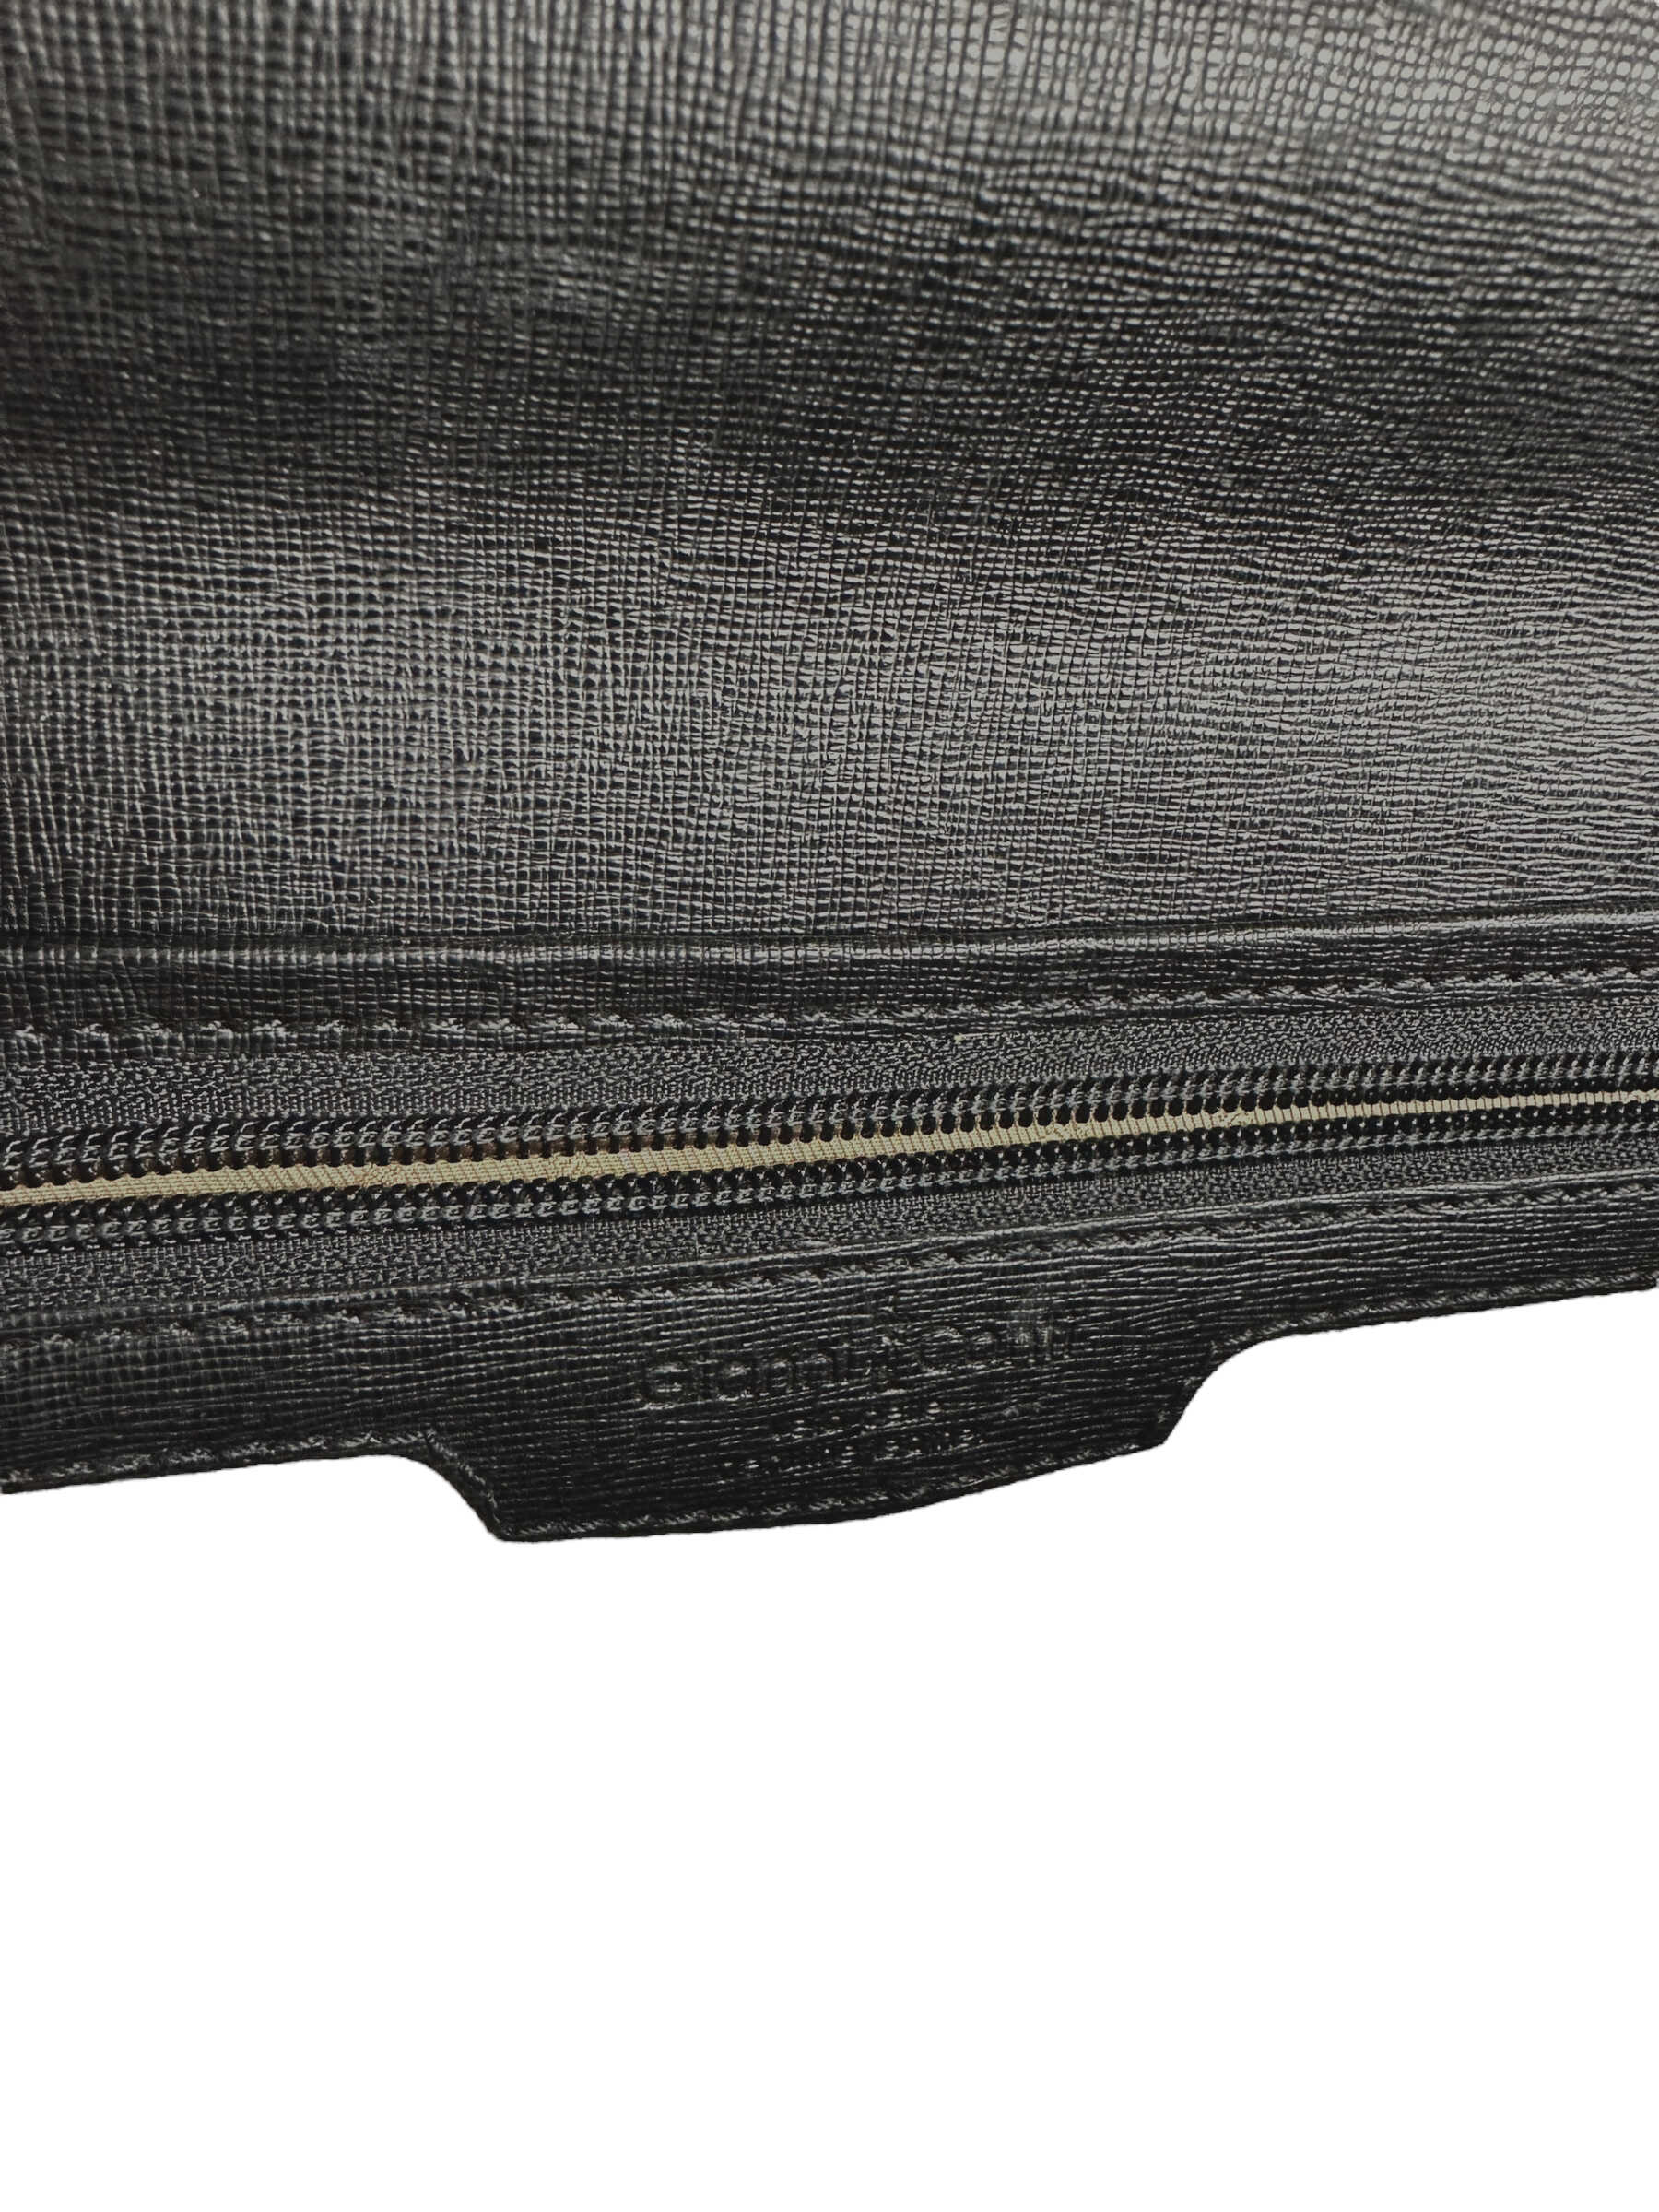 Gianni Conti Black Saffiano Leather Briefcase — Genuine Design Luxury Consignment for Men. New & Pre-Owned Clothing, Shoes, & Accessories. Calgary, Canada